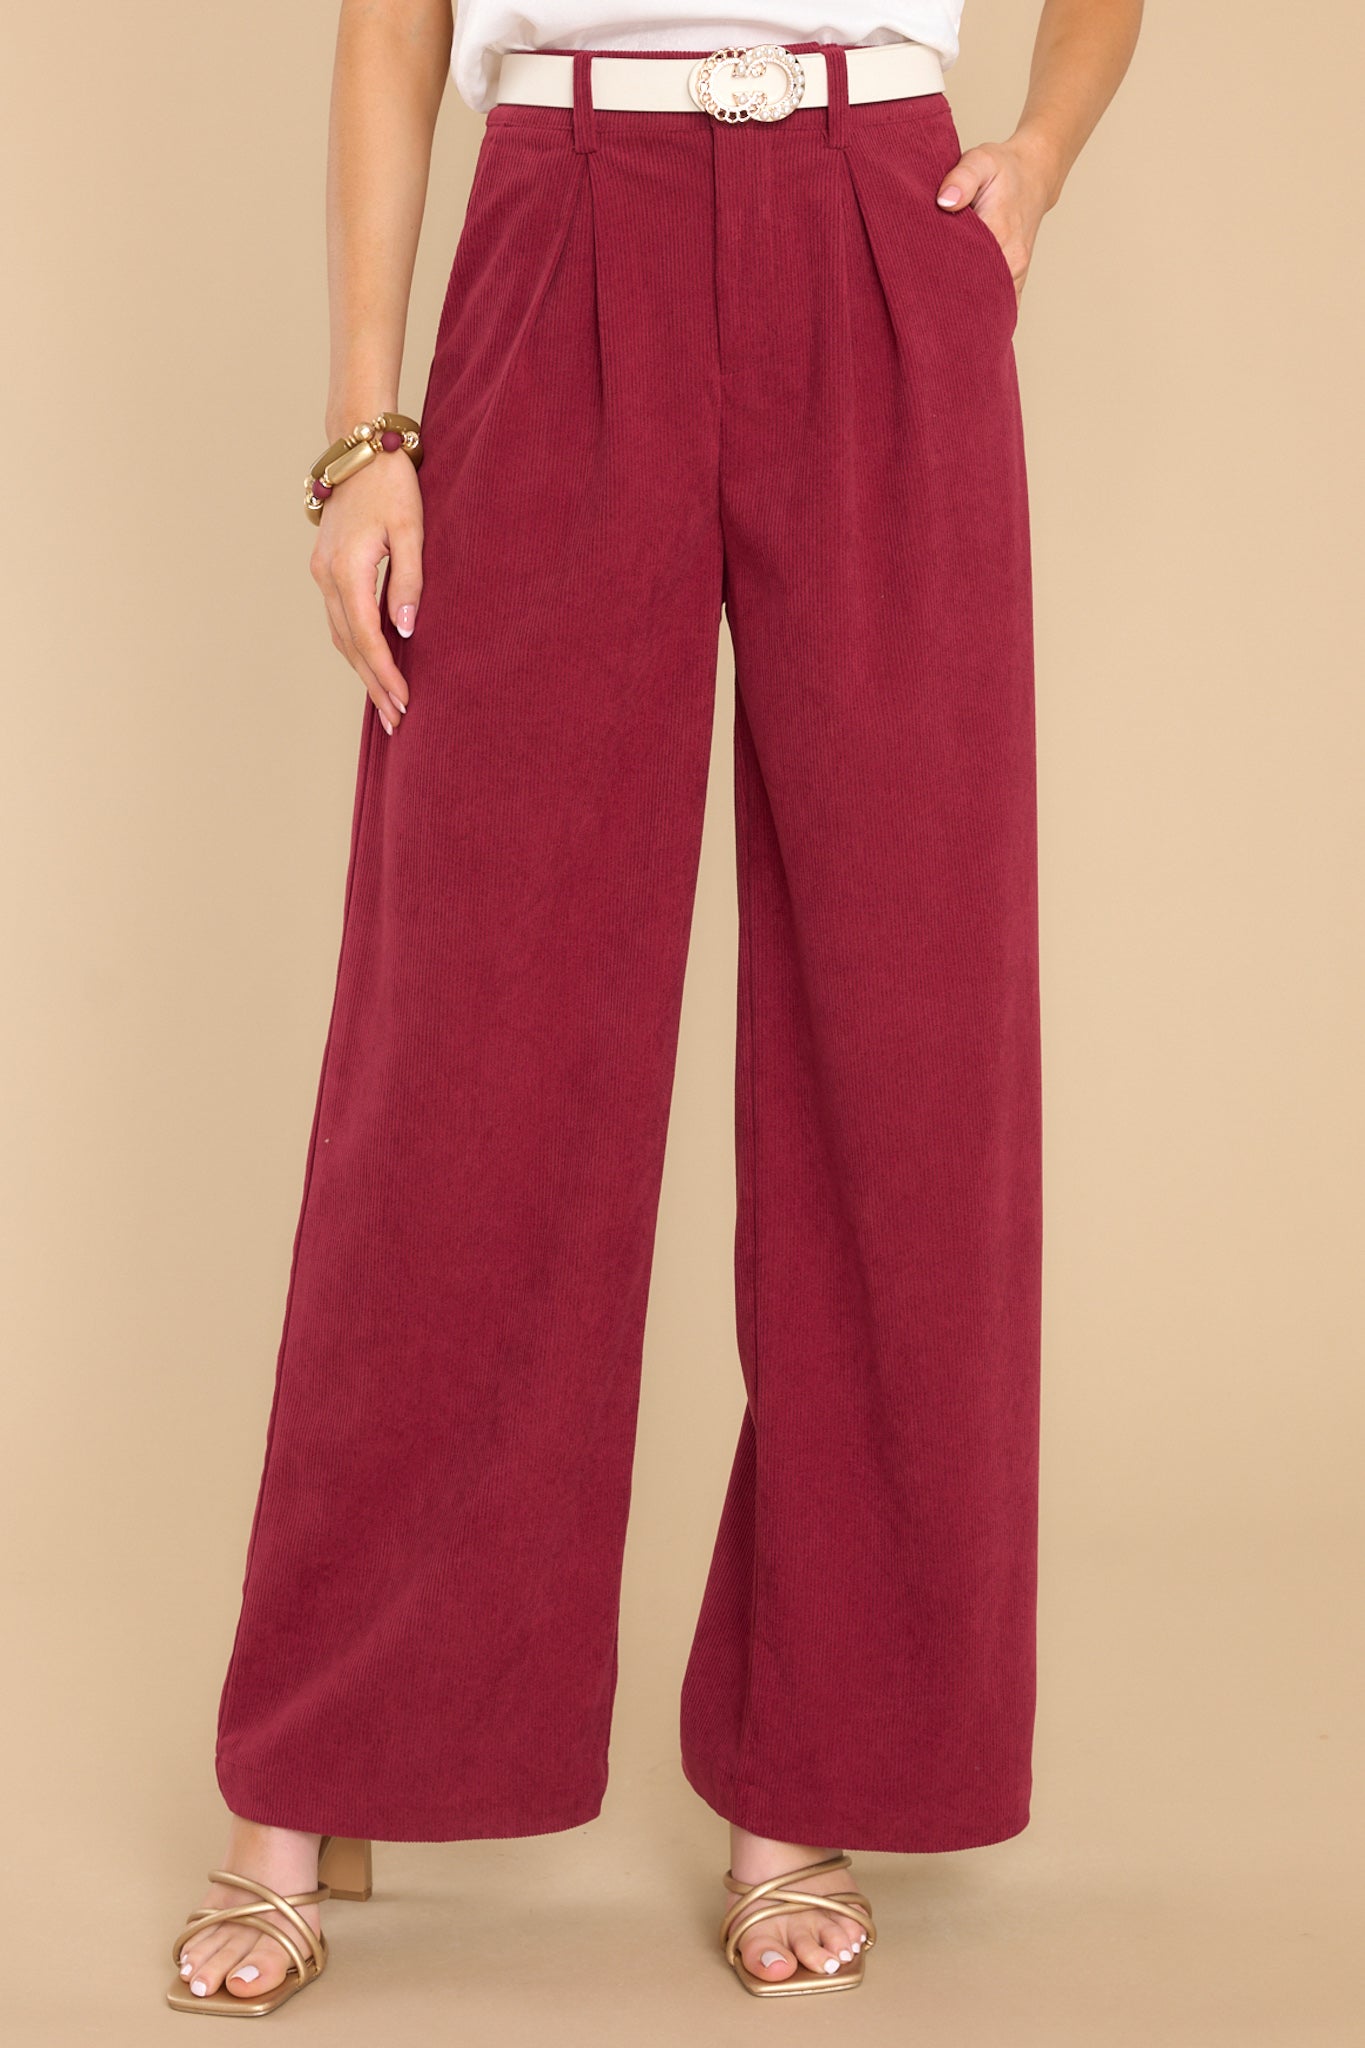 These cranberry colored pants feature a corduroy like material with a zipper hook and eye closure, and two front functional pockets.